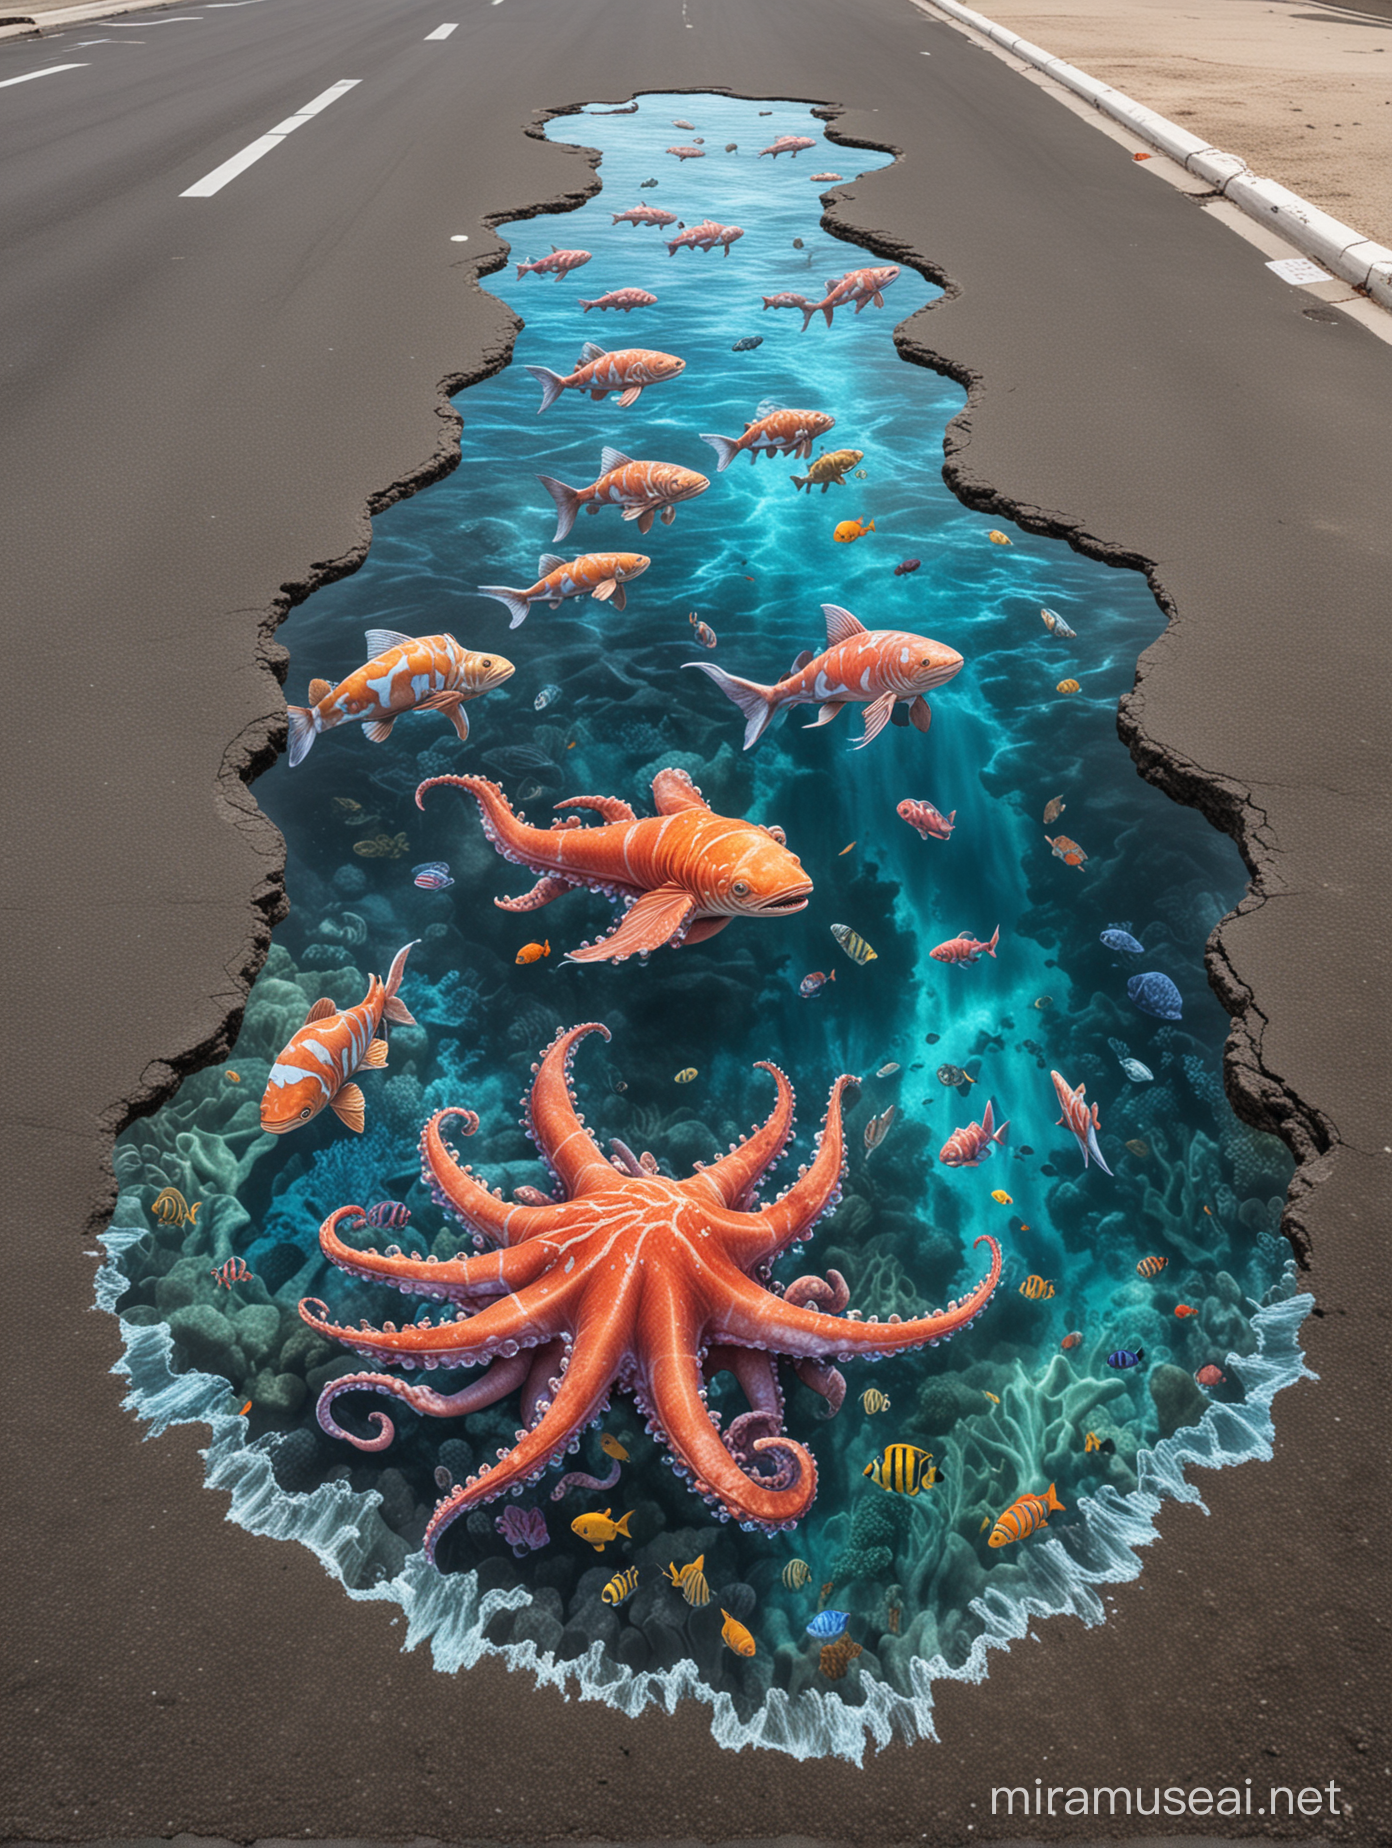 Hyperrealistic 3D Chalk Drawing Vibrant Coral Reef with Colorful Fish and Giant Octopus